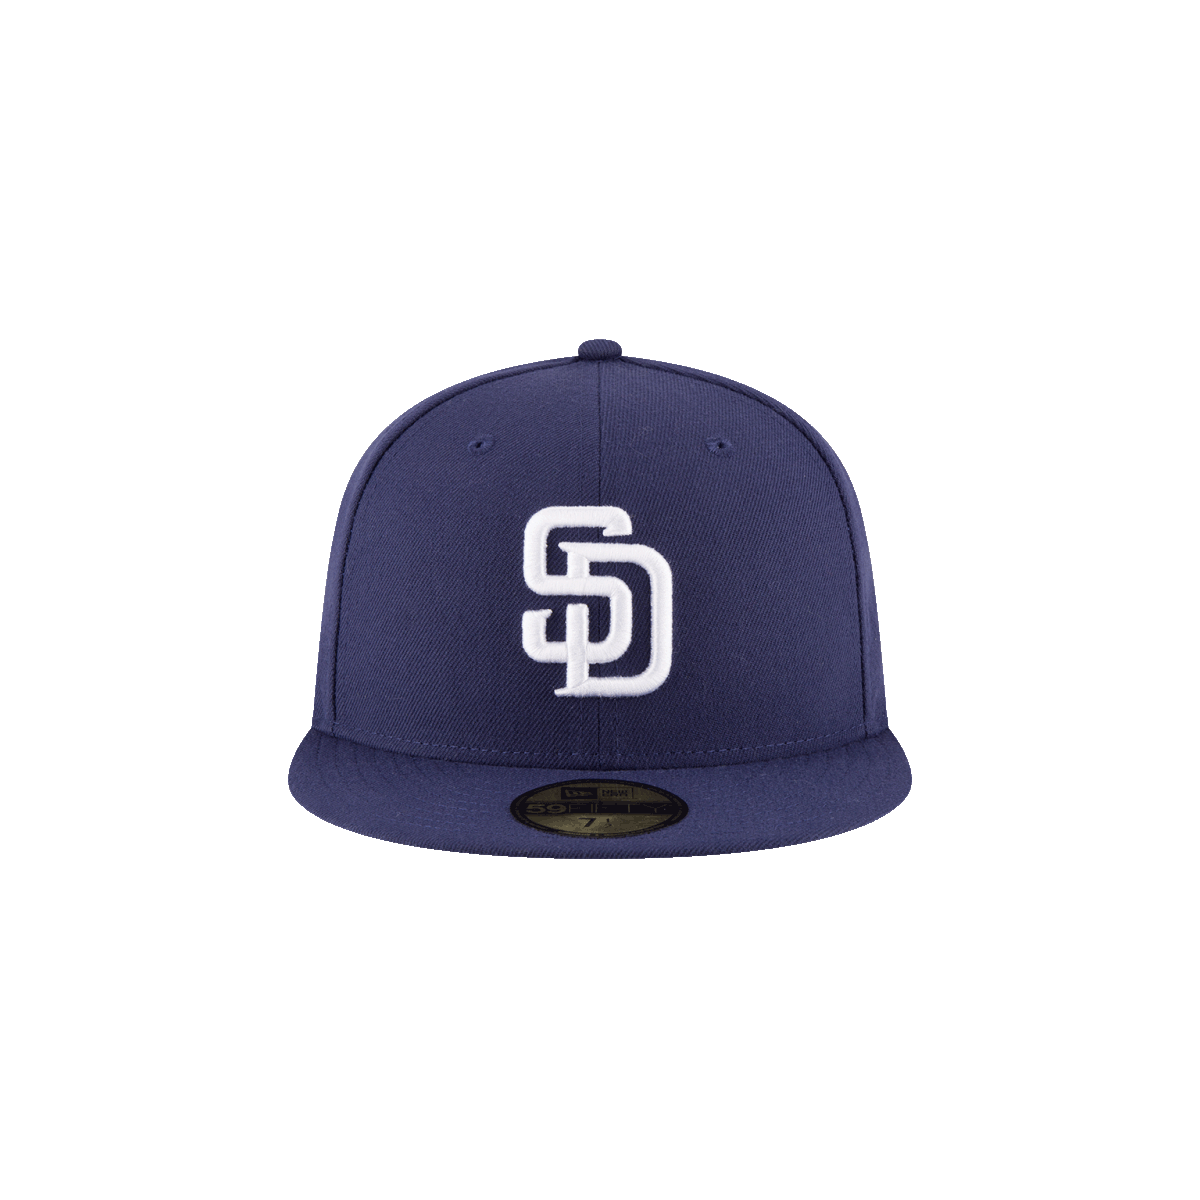 Baseball Hat Sticker by New Era Cap for iOS & Android | GIPHY